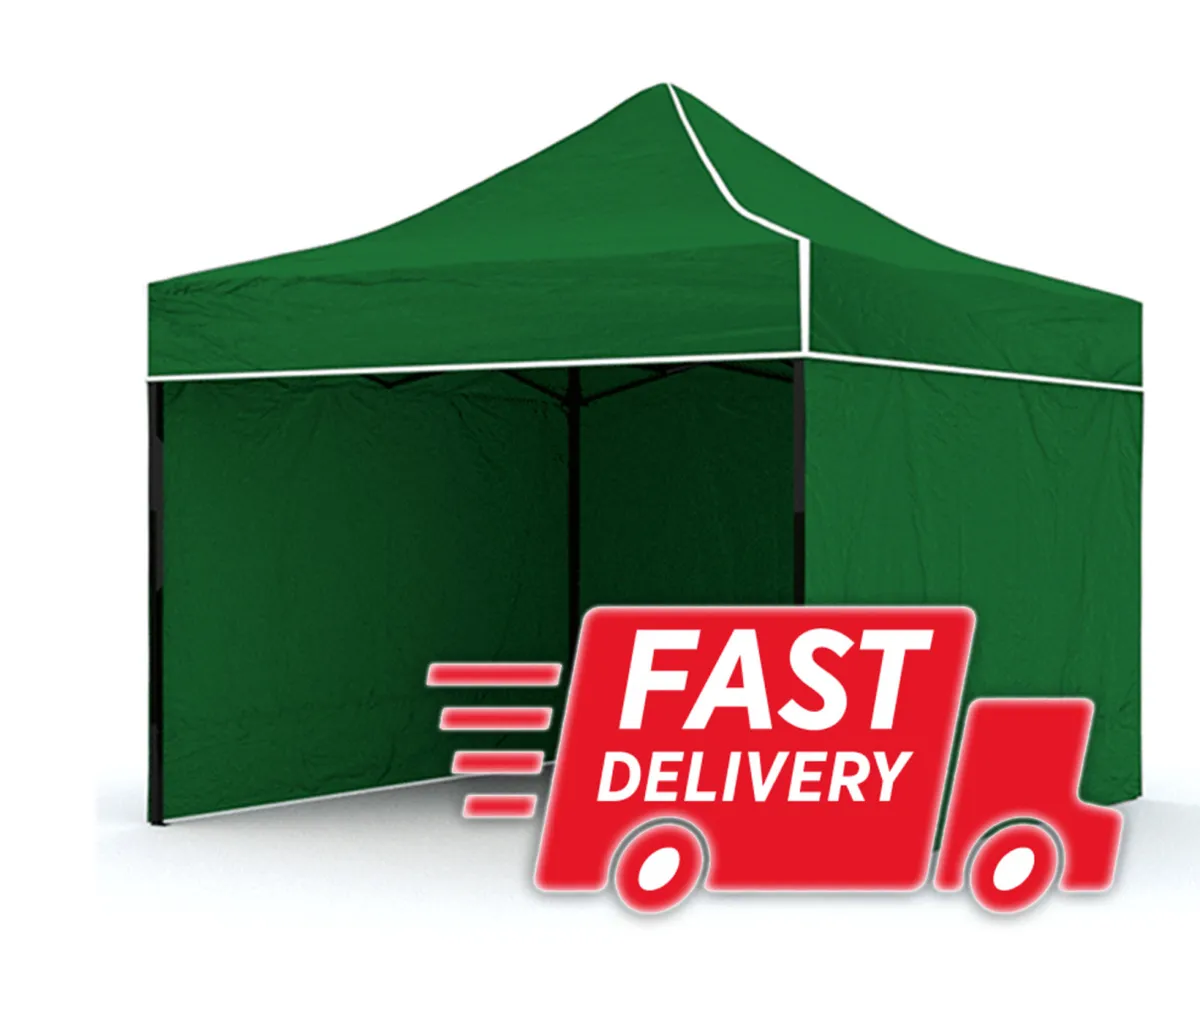 Extra Strong Commercial Grade 3x3m GAZEBO pop up